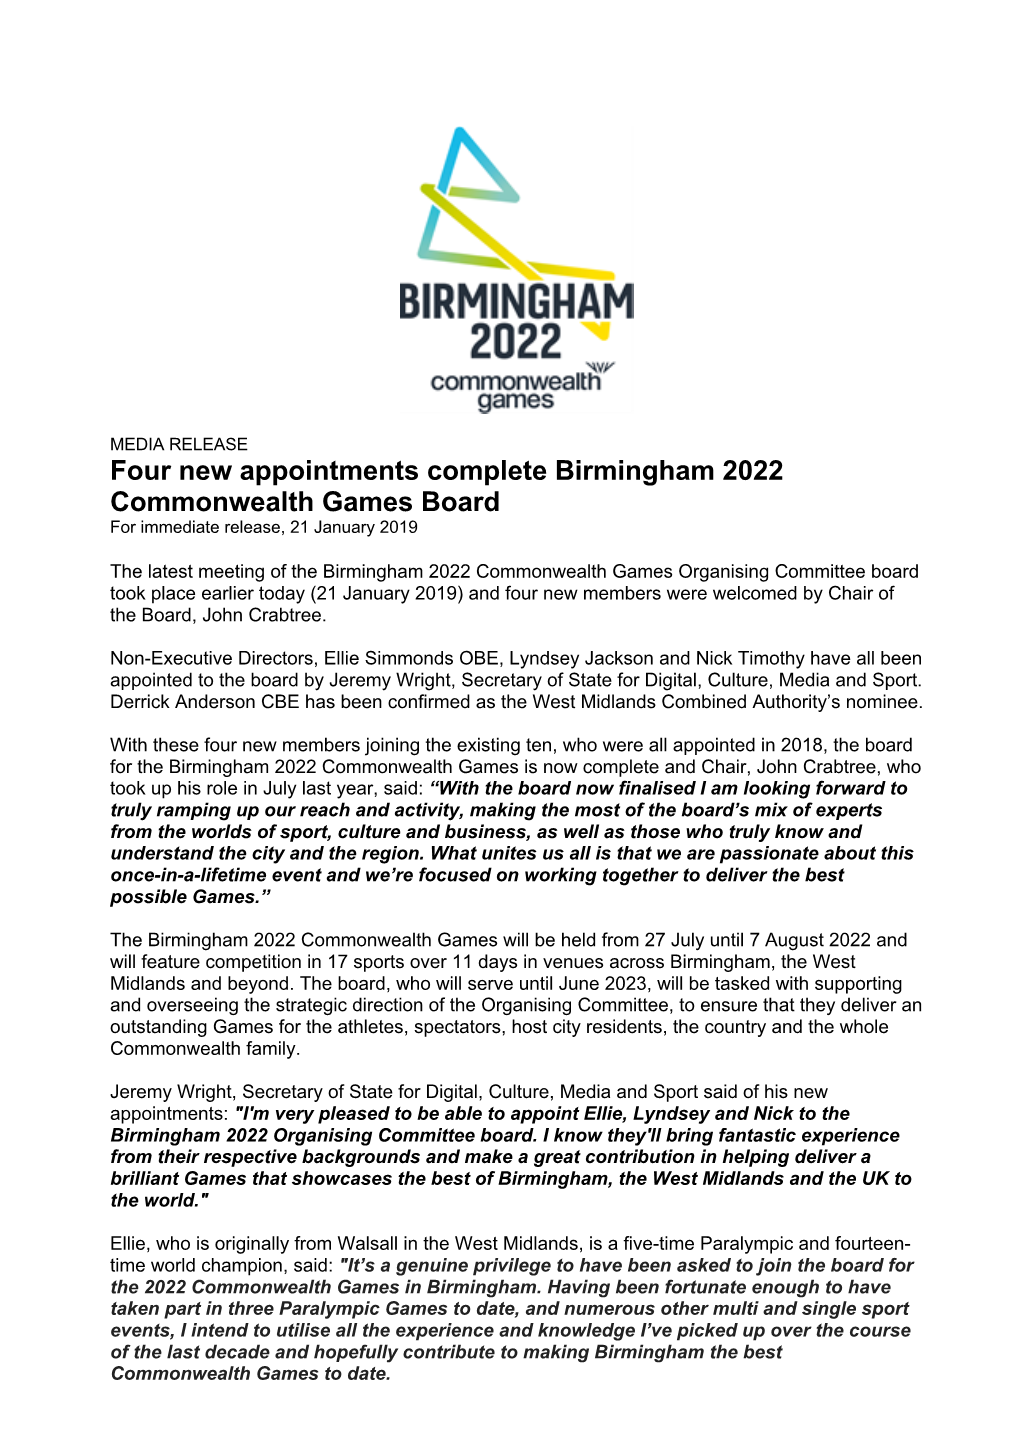 Appointed to the Birmingham 2022 Board